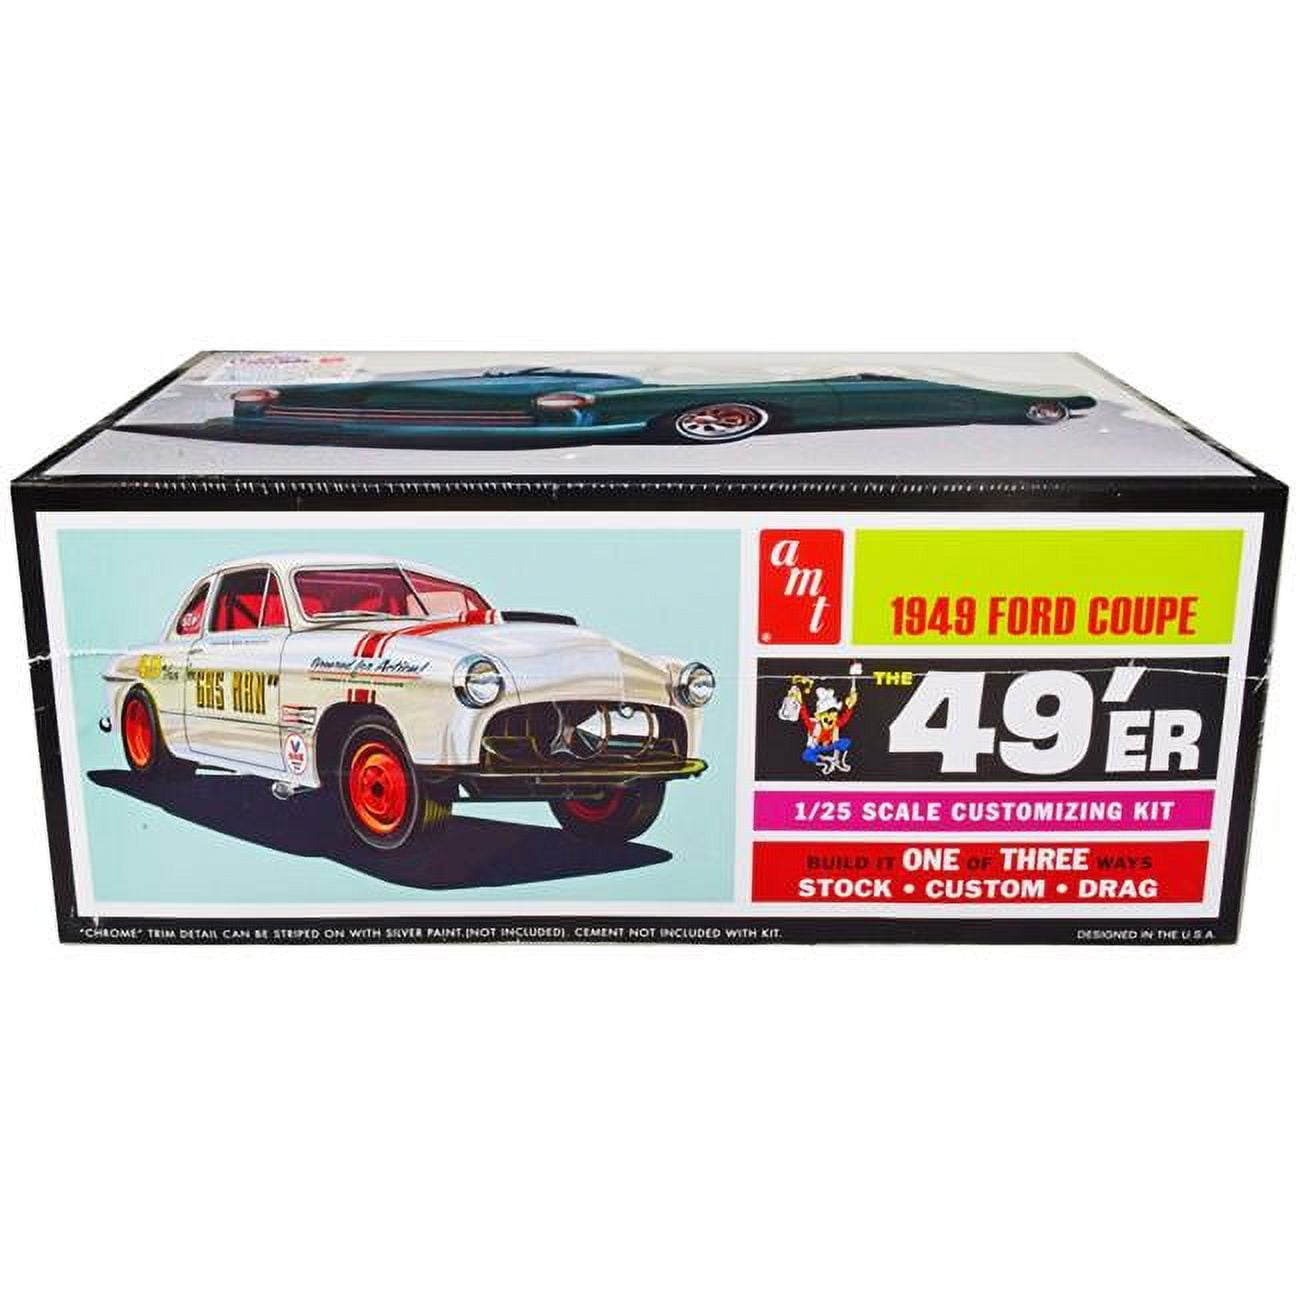 Picture of AMT AMT1359 3-in-1 Skill 2 Model Kit - 1 by 25 Scale Model for 1949 Ford Coupe The 49er